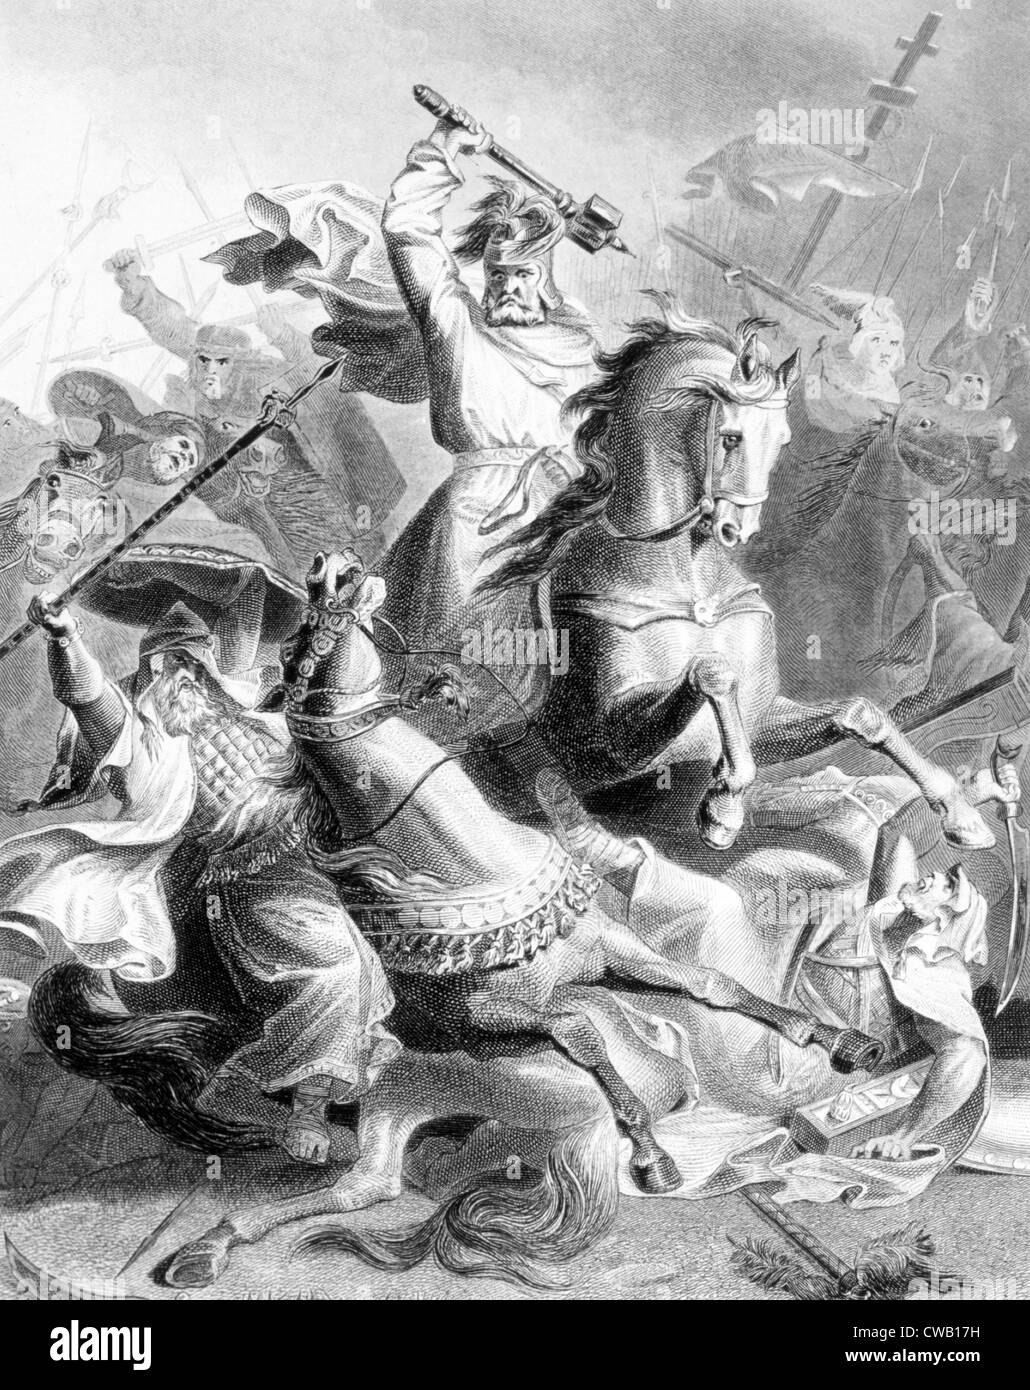 Charles Martel halting the Moorish conquest of Europe at the Battle of Tours, 732 A.D., engraving after the painting by G. Stock Photo